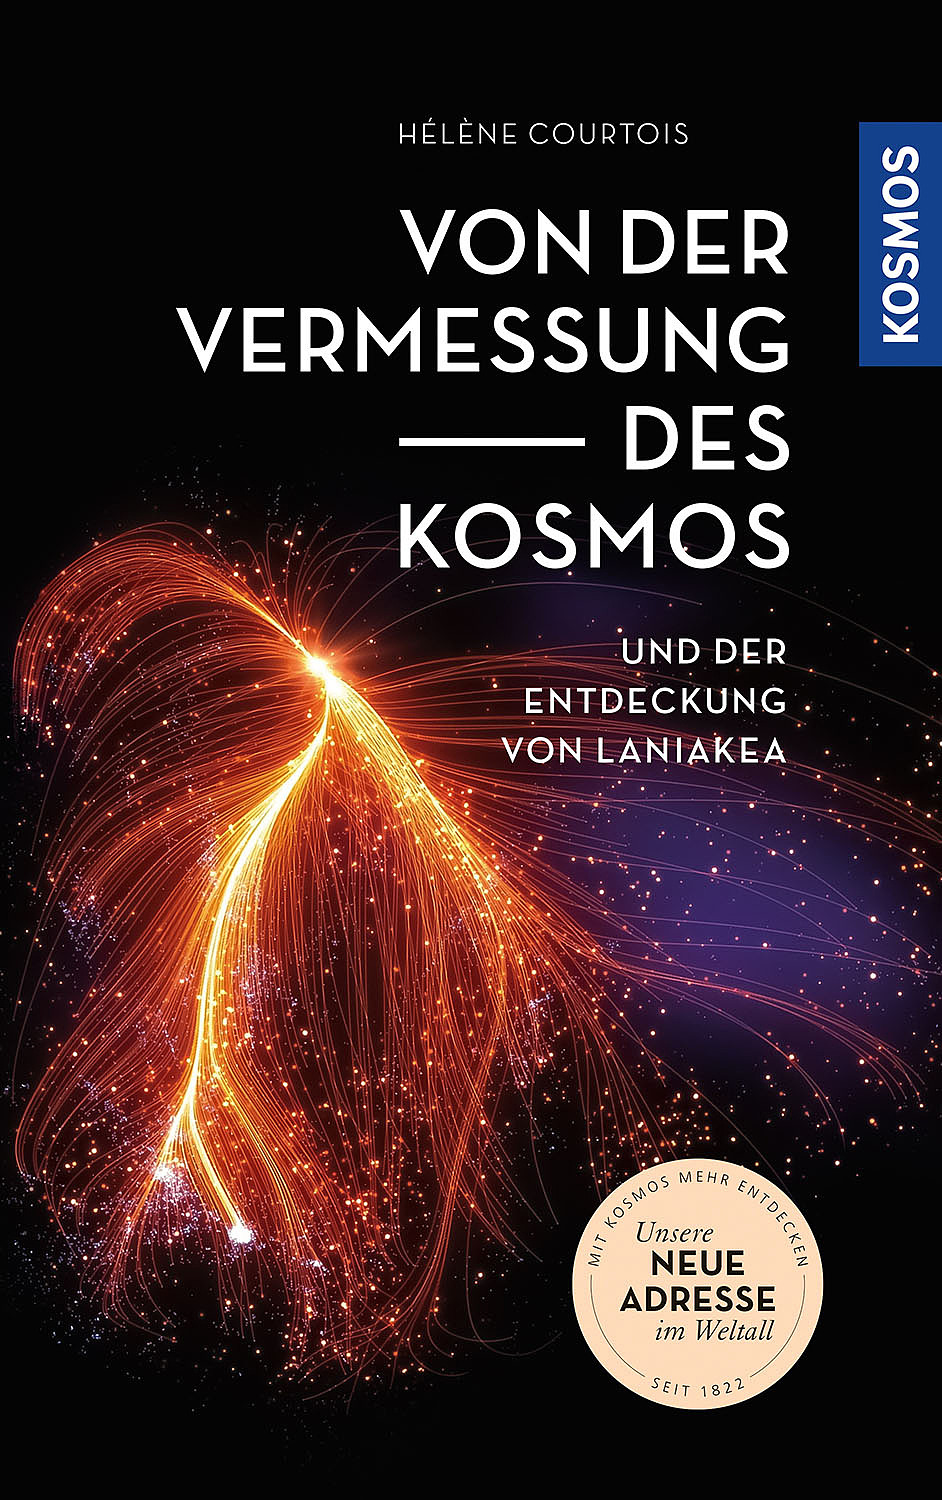 Book review "From the Measurement of the Universe"